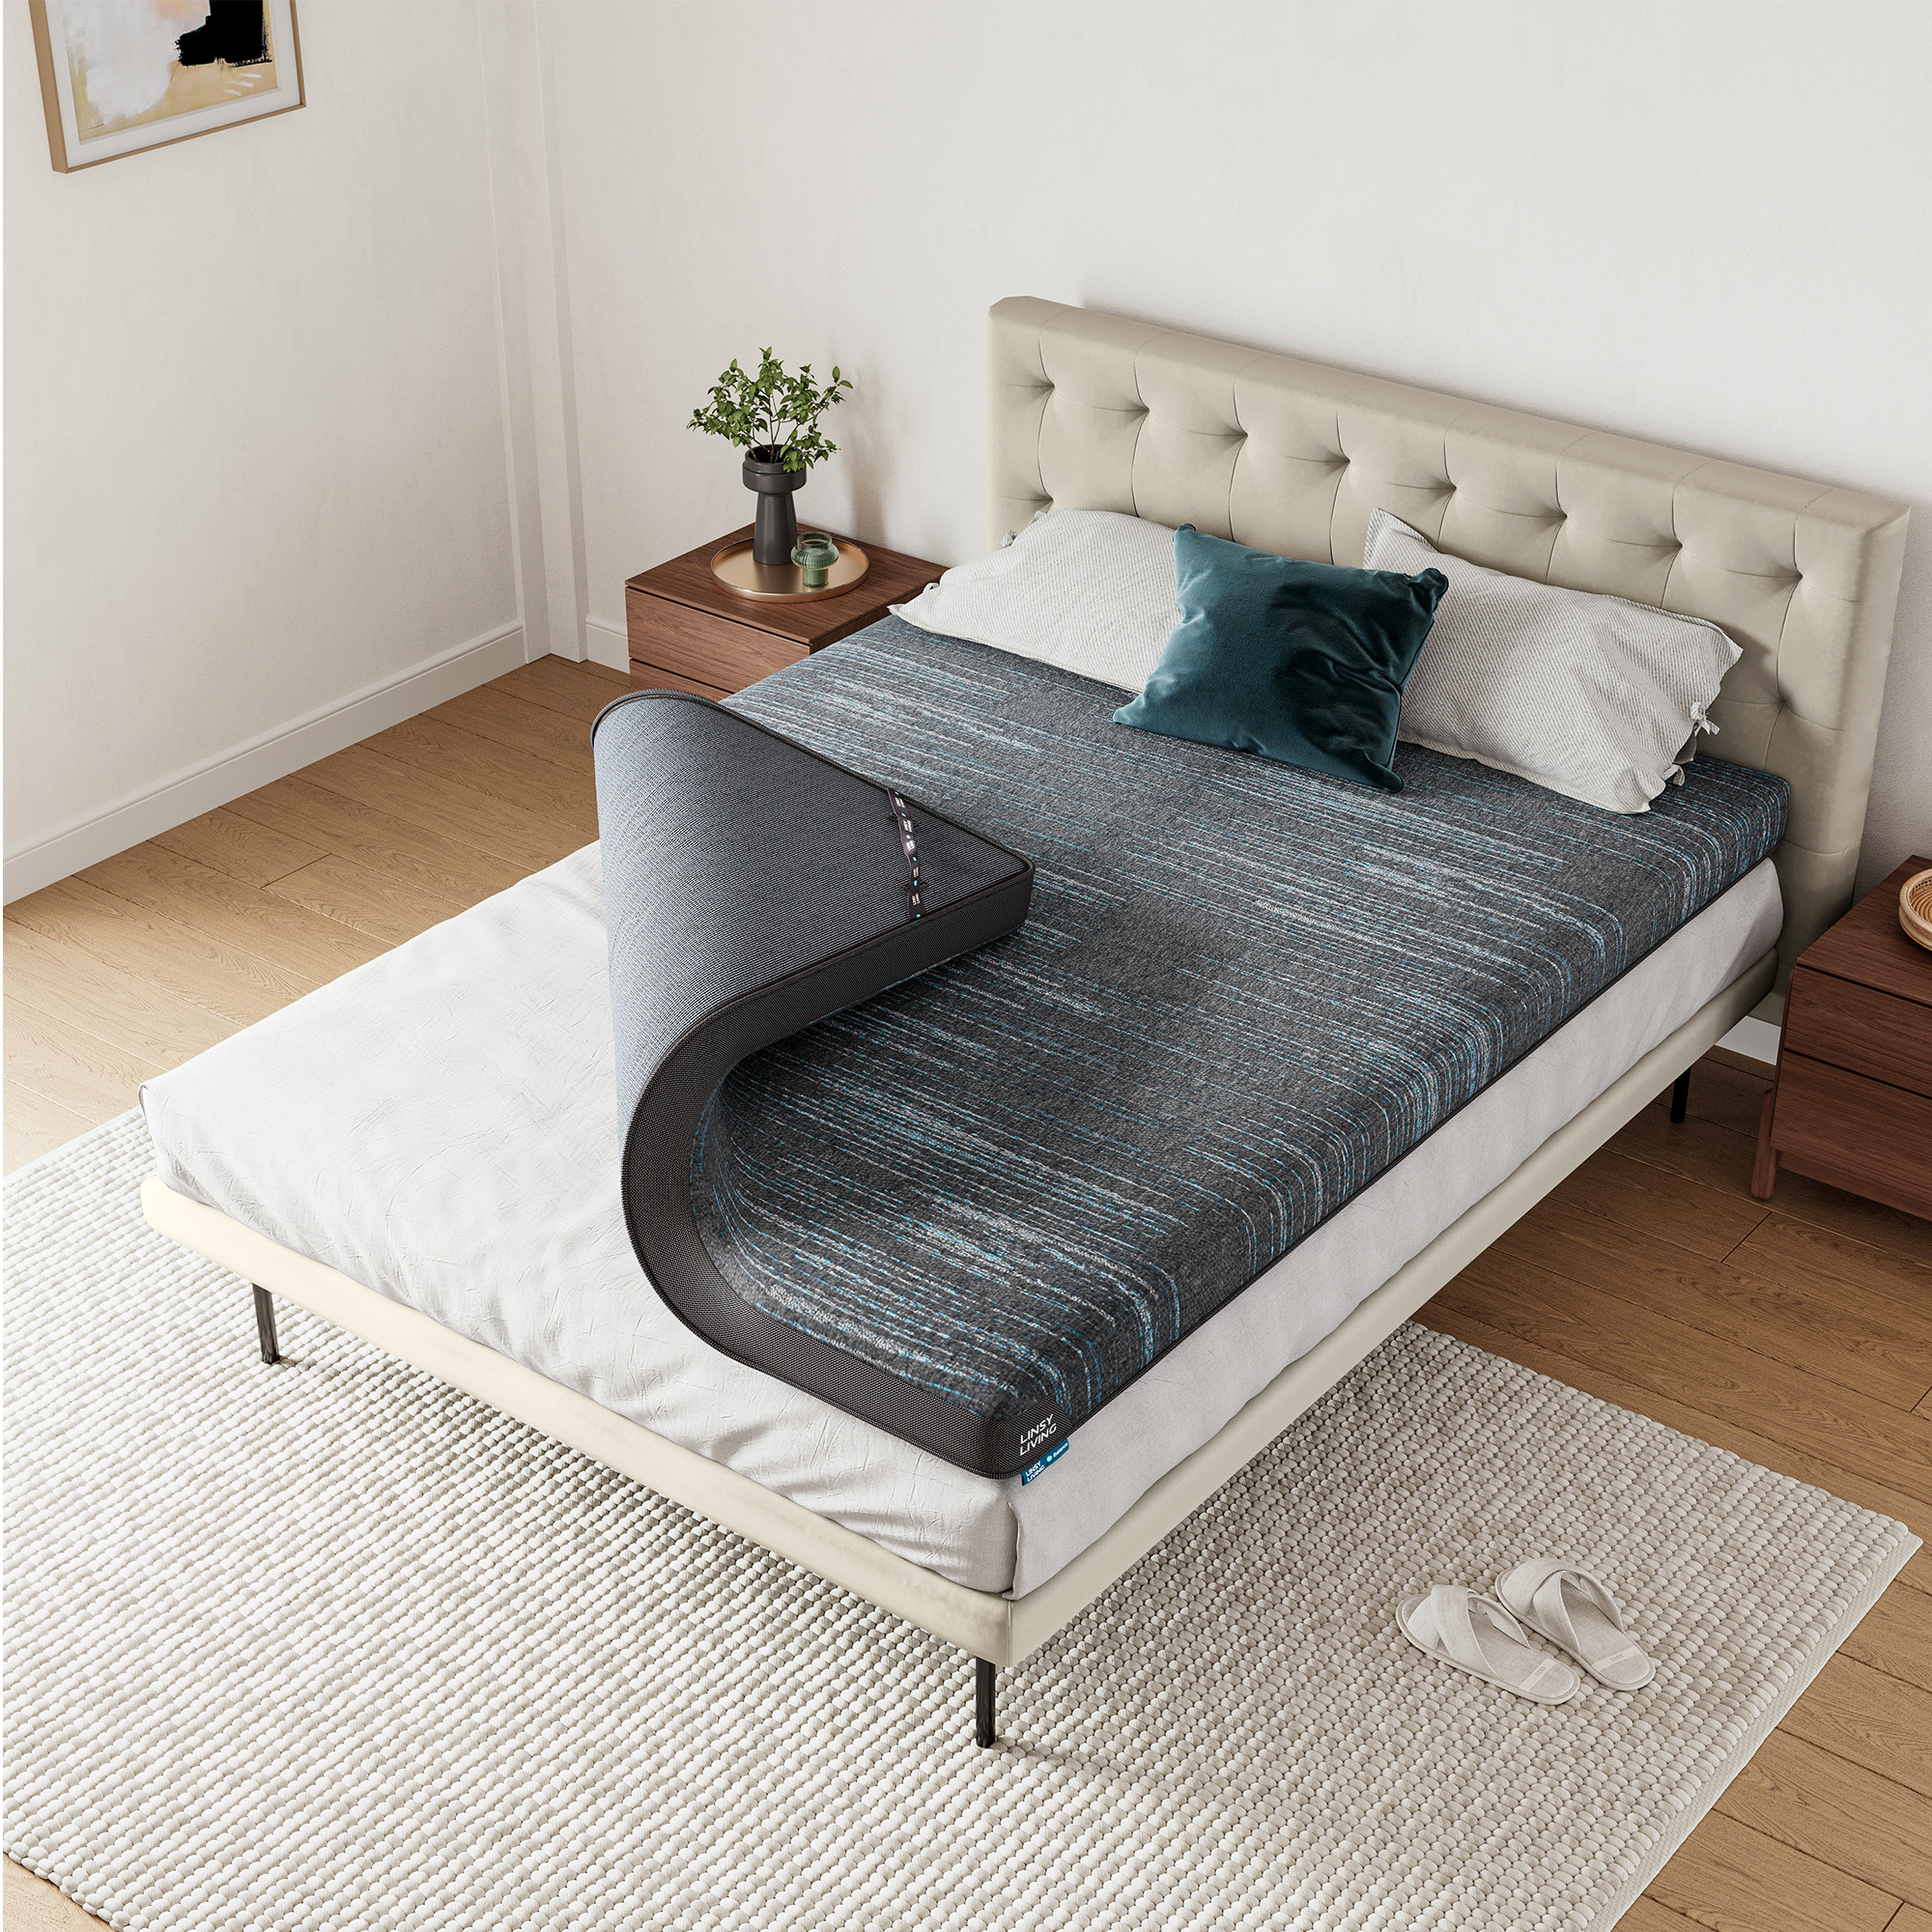 The Linsy Living 3-Inch Mattress Topper Starts at $75 With a Coupon at